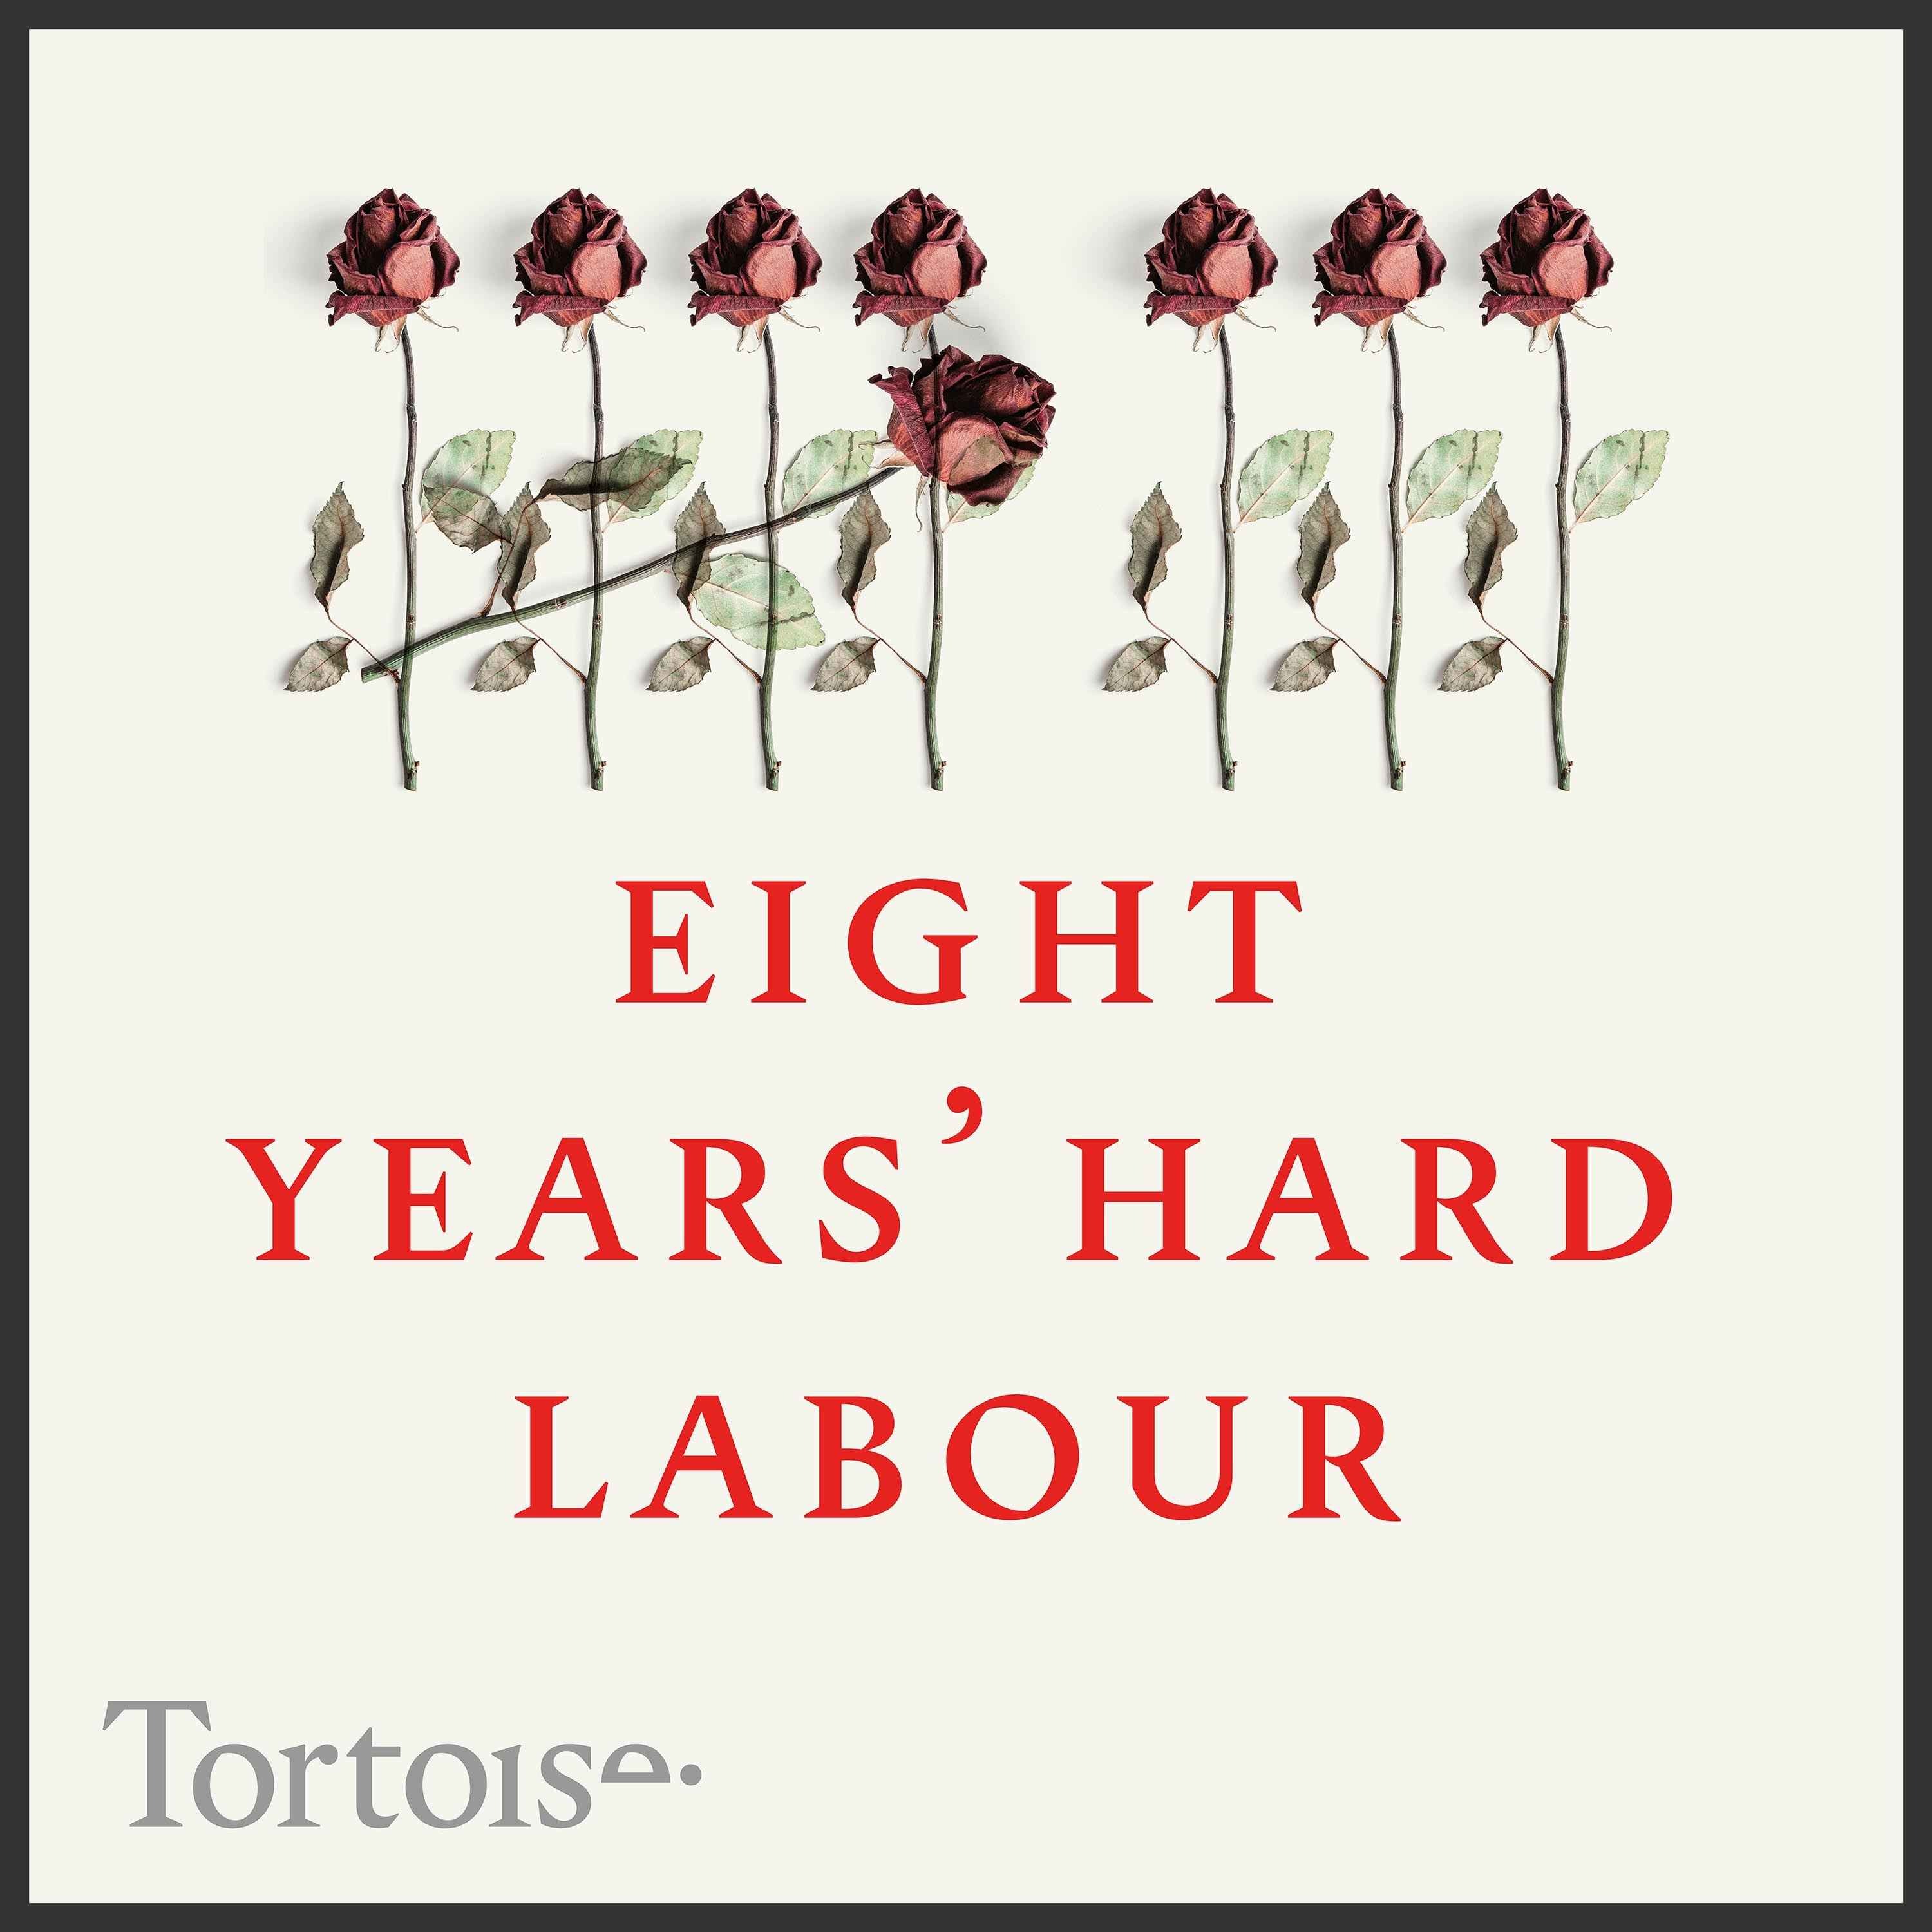 Introducing: Eight years’ hard Labour